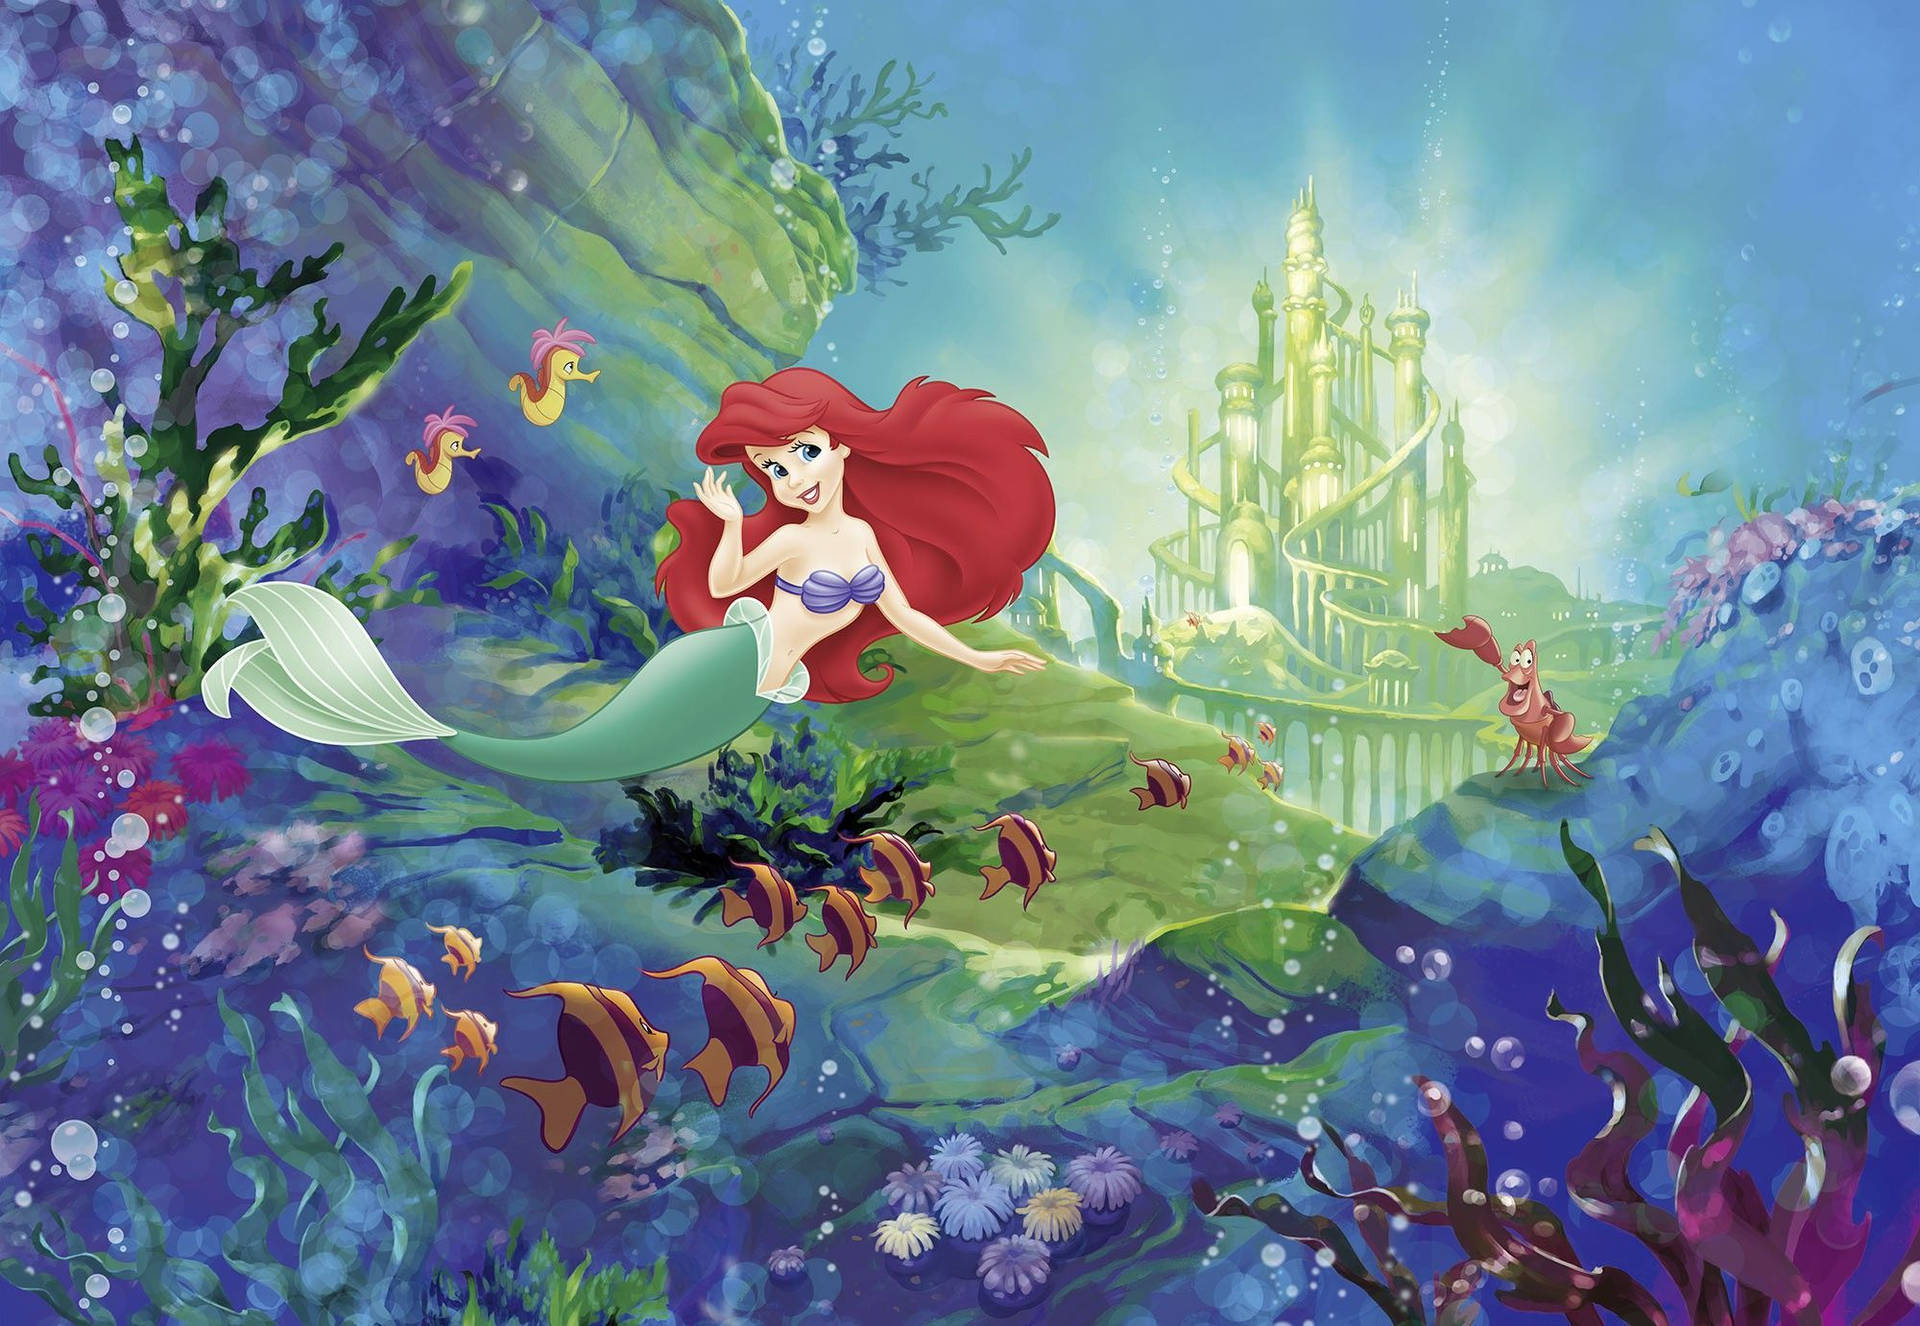 60 The Little Mermaid HD Wallpapers and Backgrounds